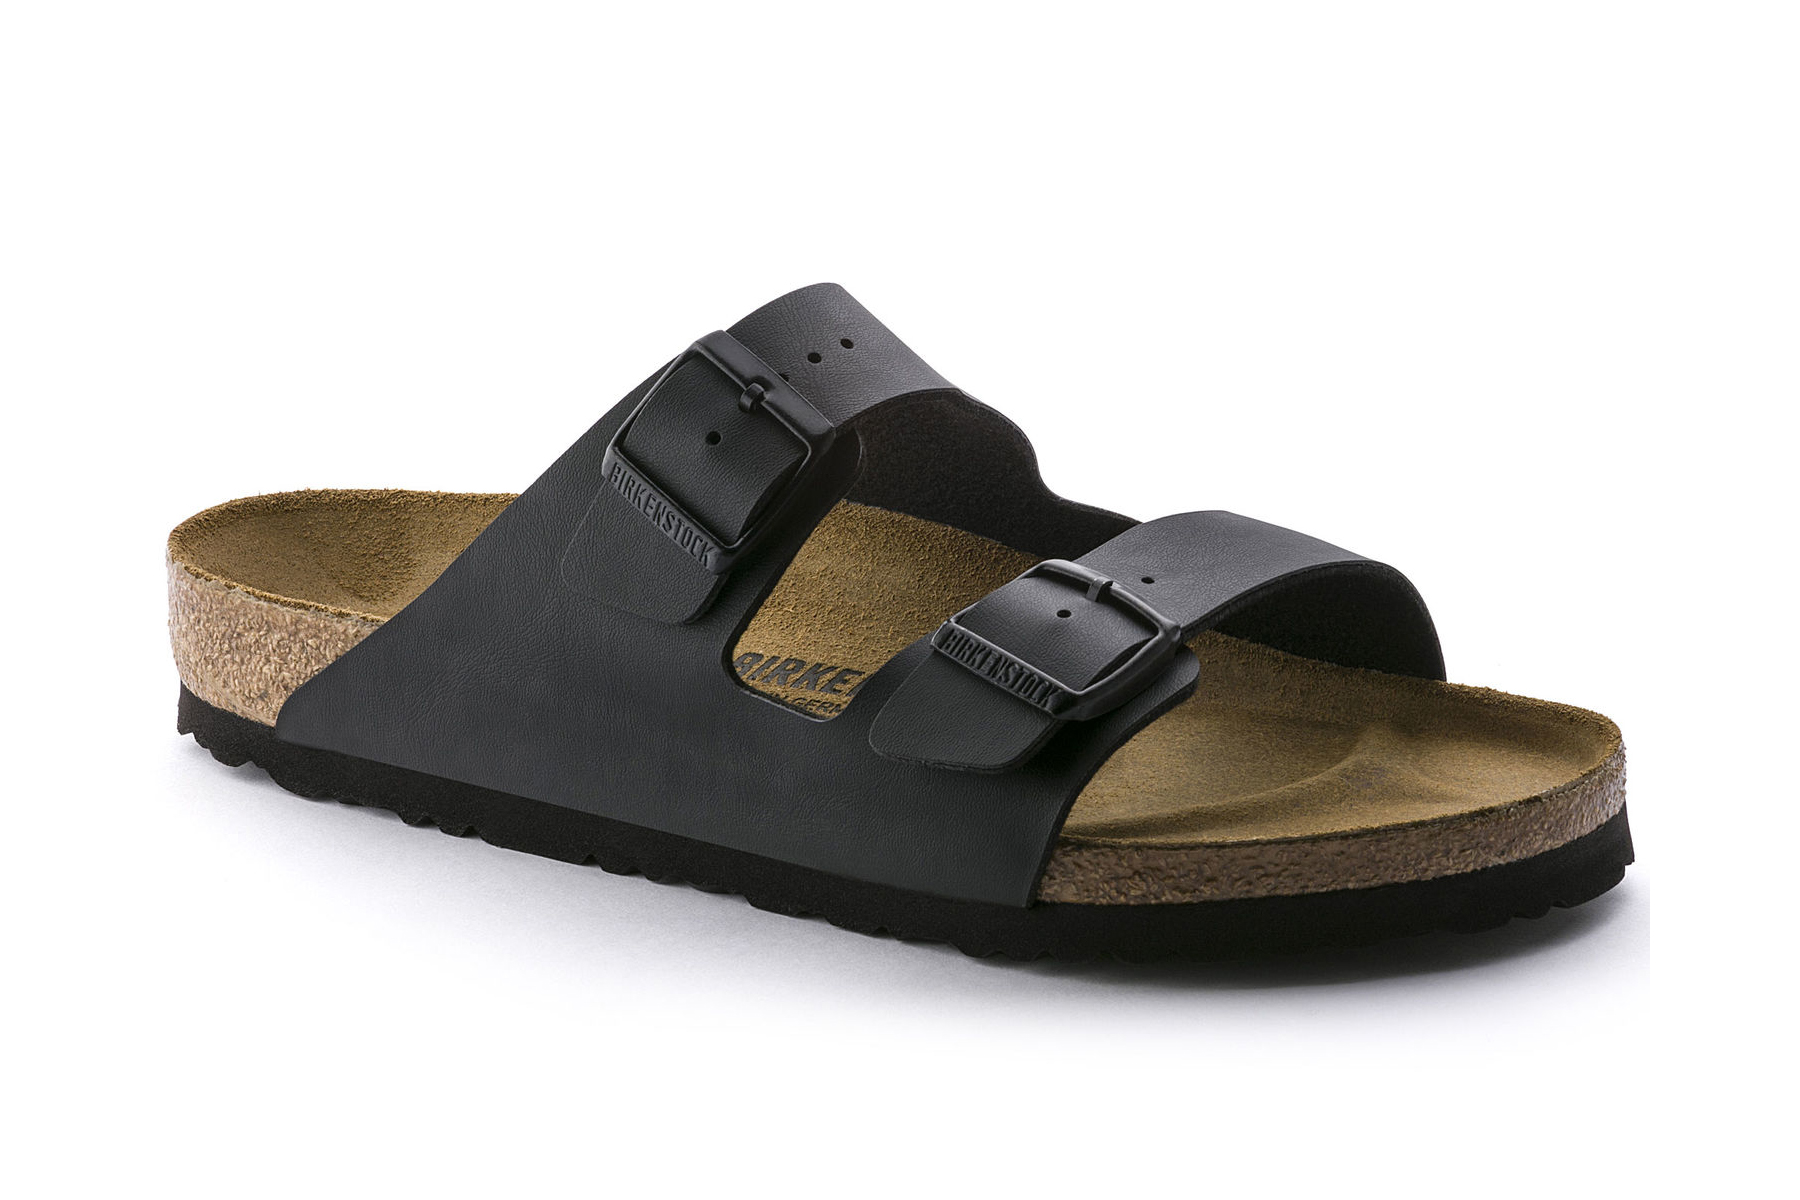 sandals that can be worn with orthotics